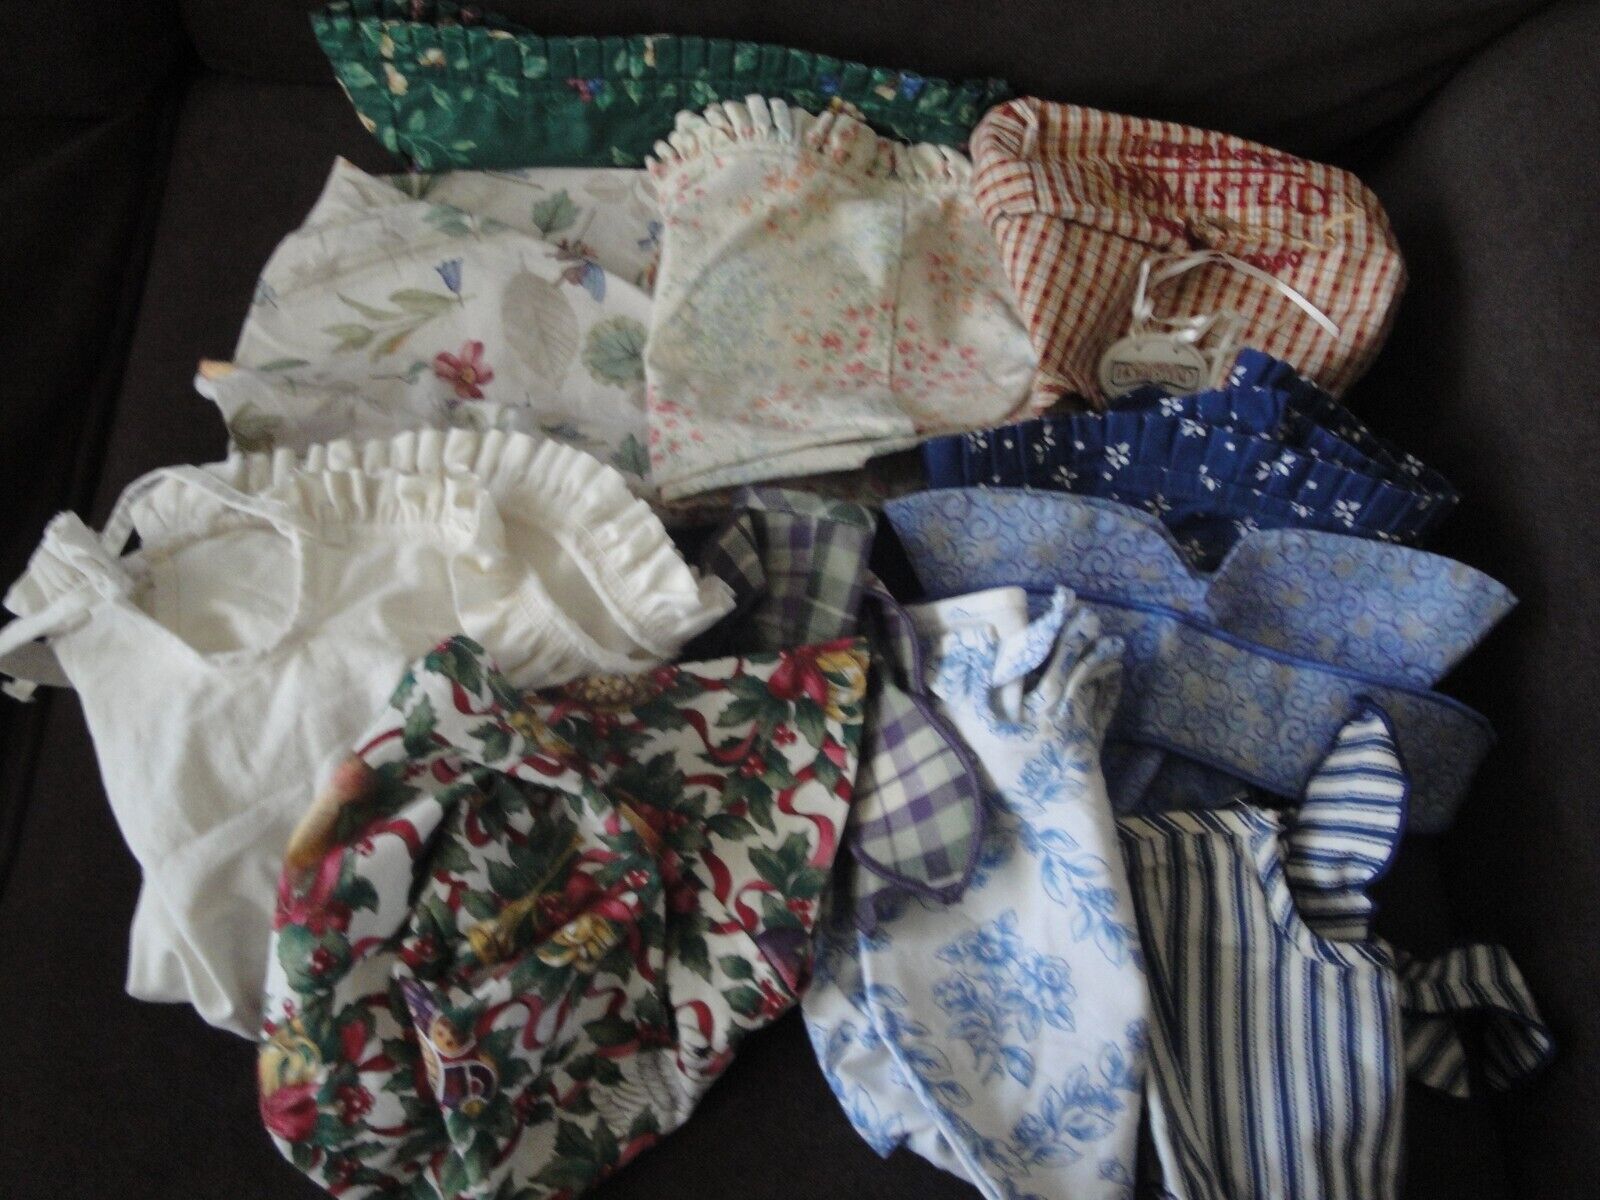 Longerberger Basket Fabric Liners Lot of 11 + Tie-On Mixed Patterns & Sizes USA